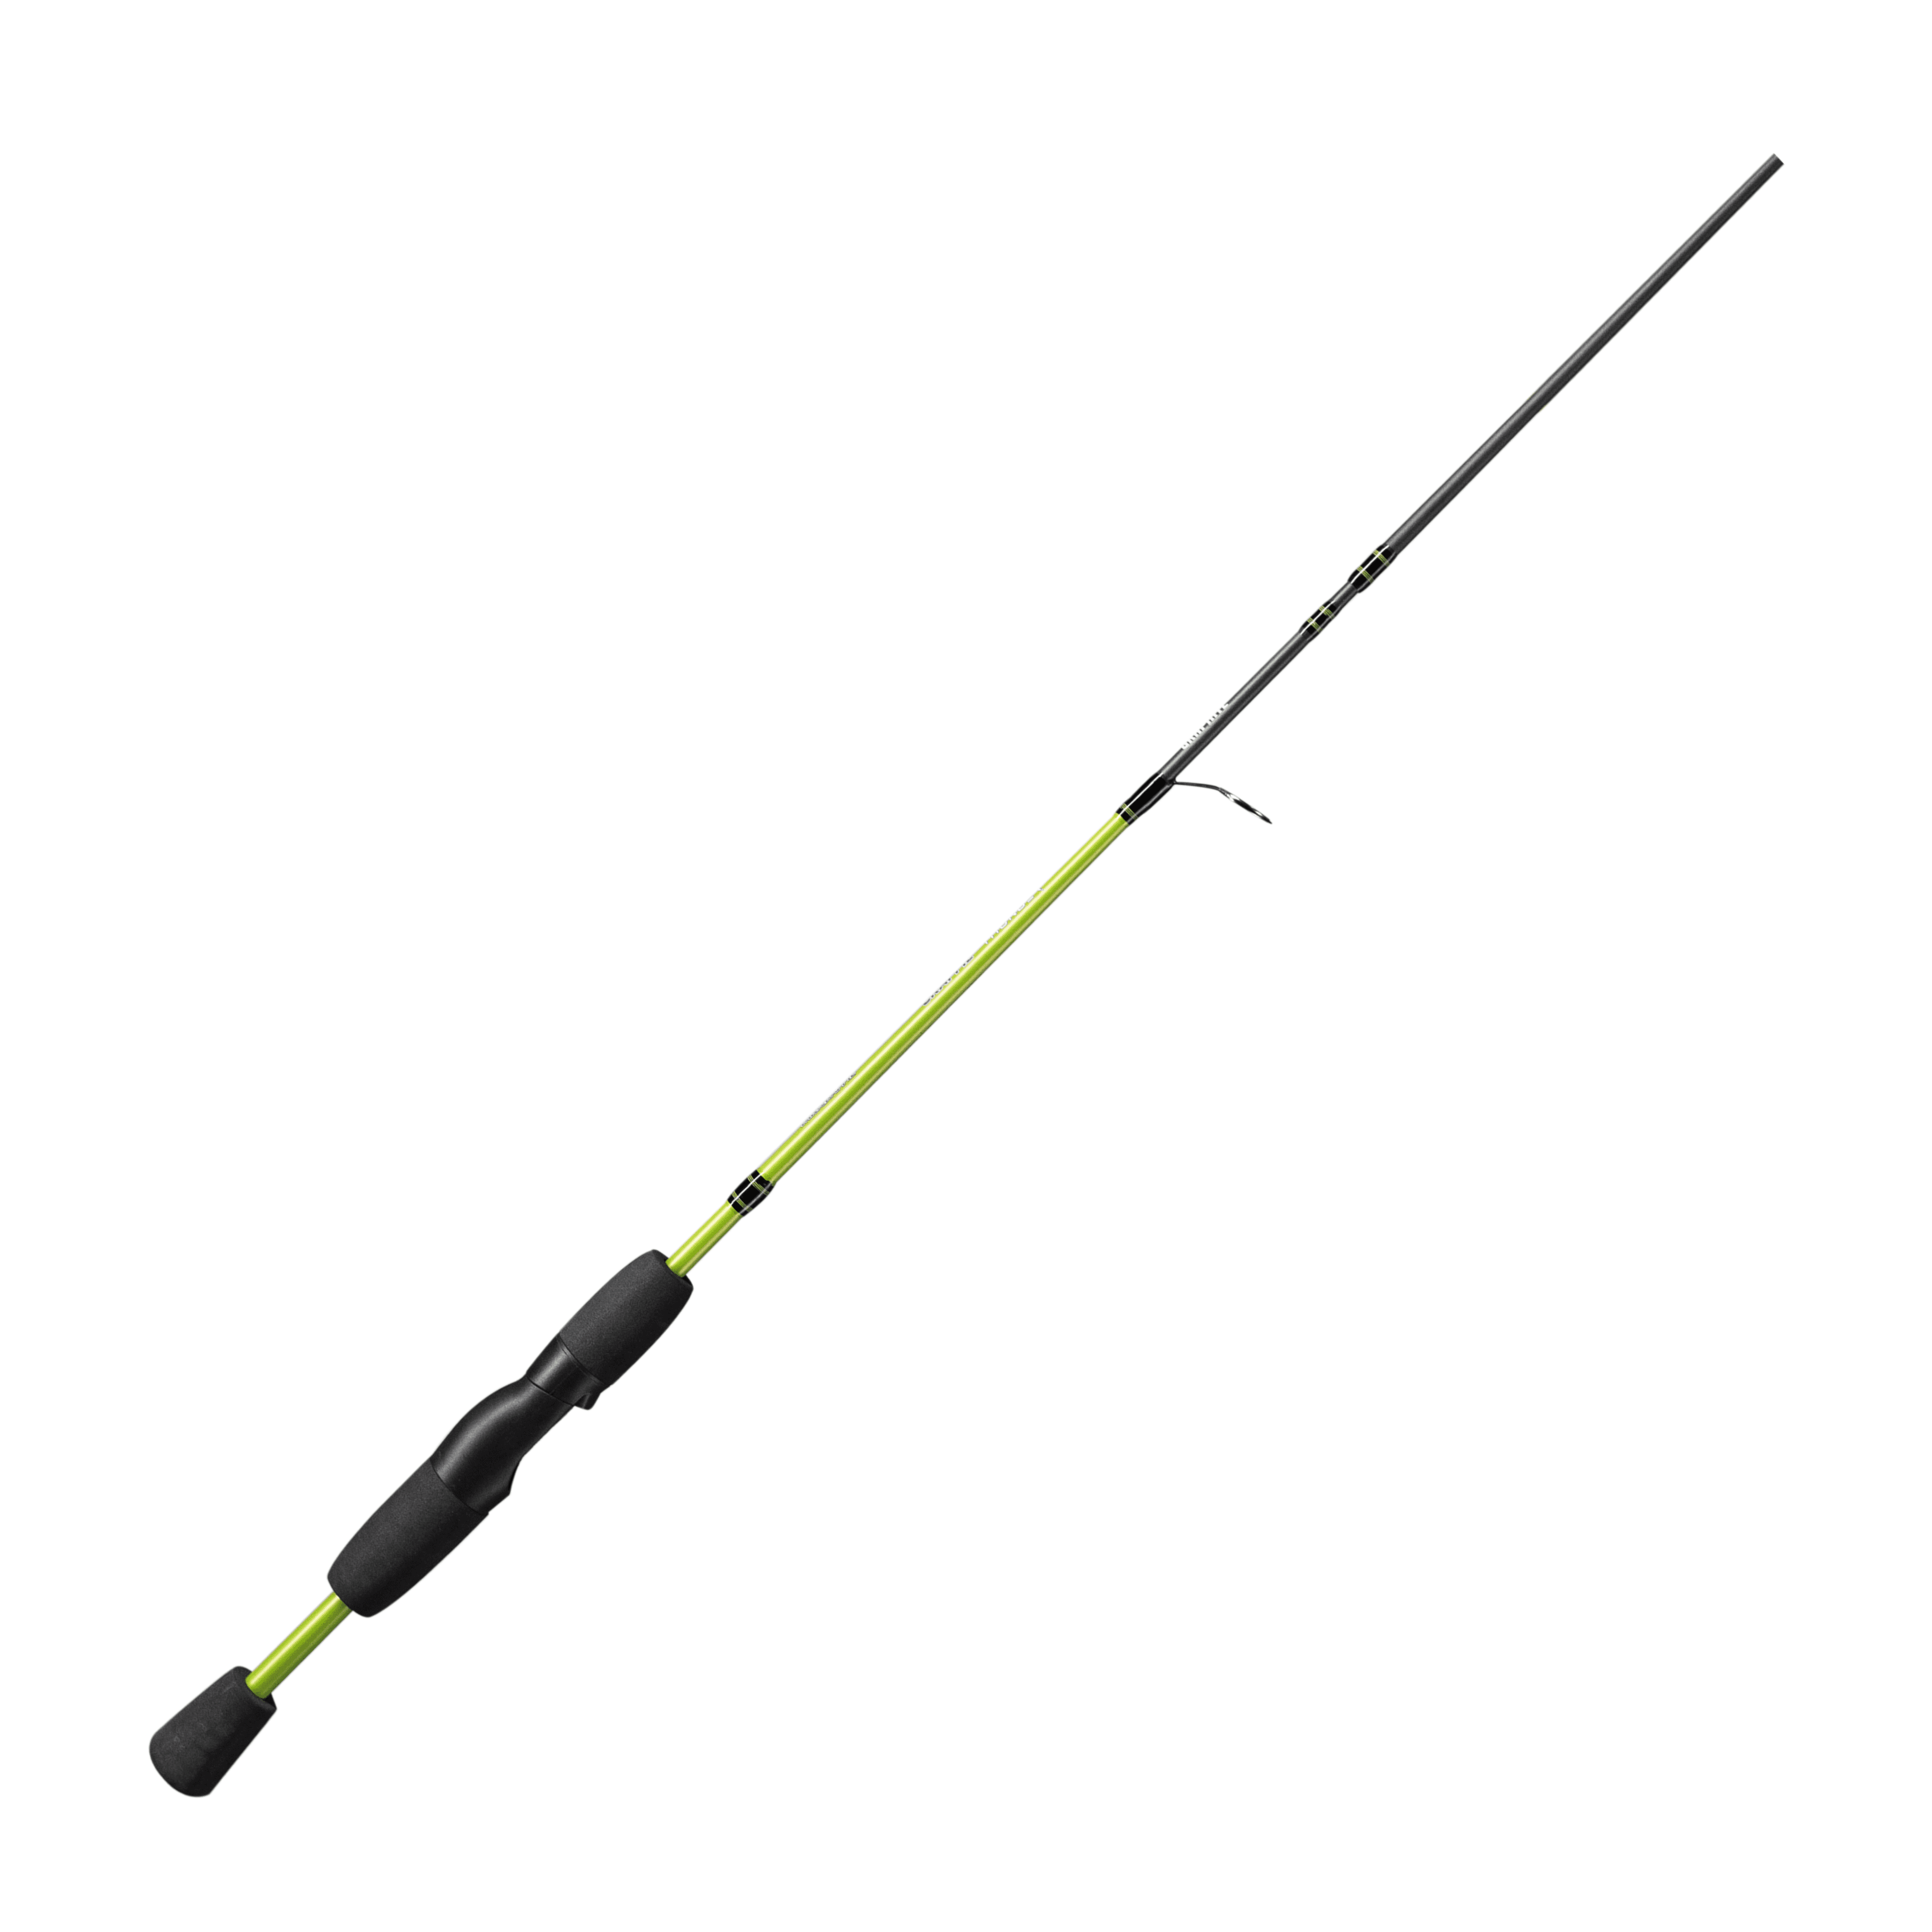 CRAPPIE THUNDER 6'6 SPINNING ROD 